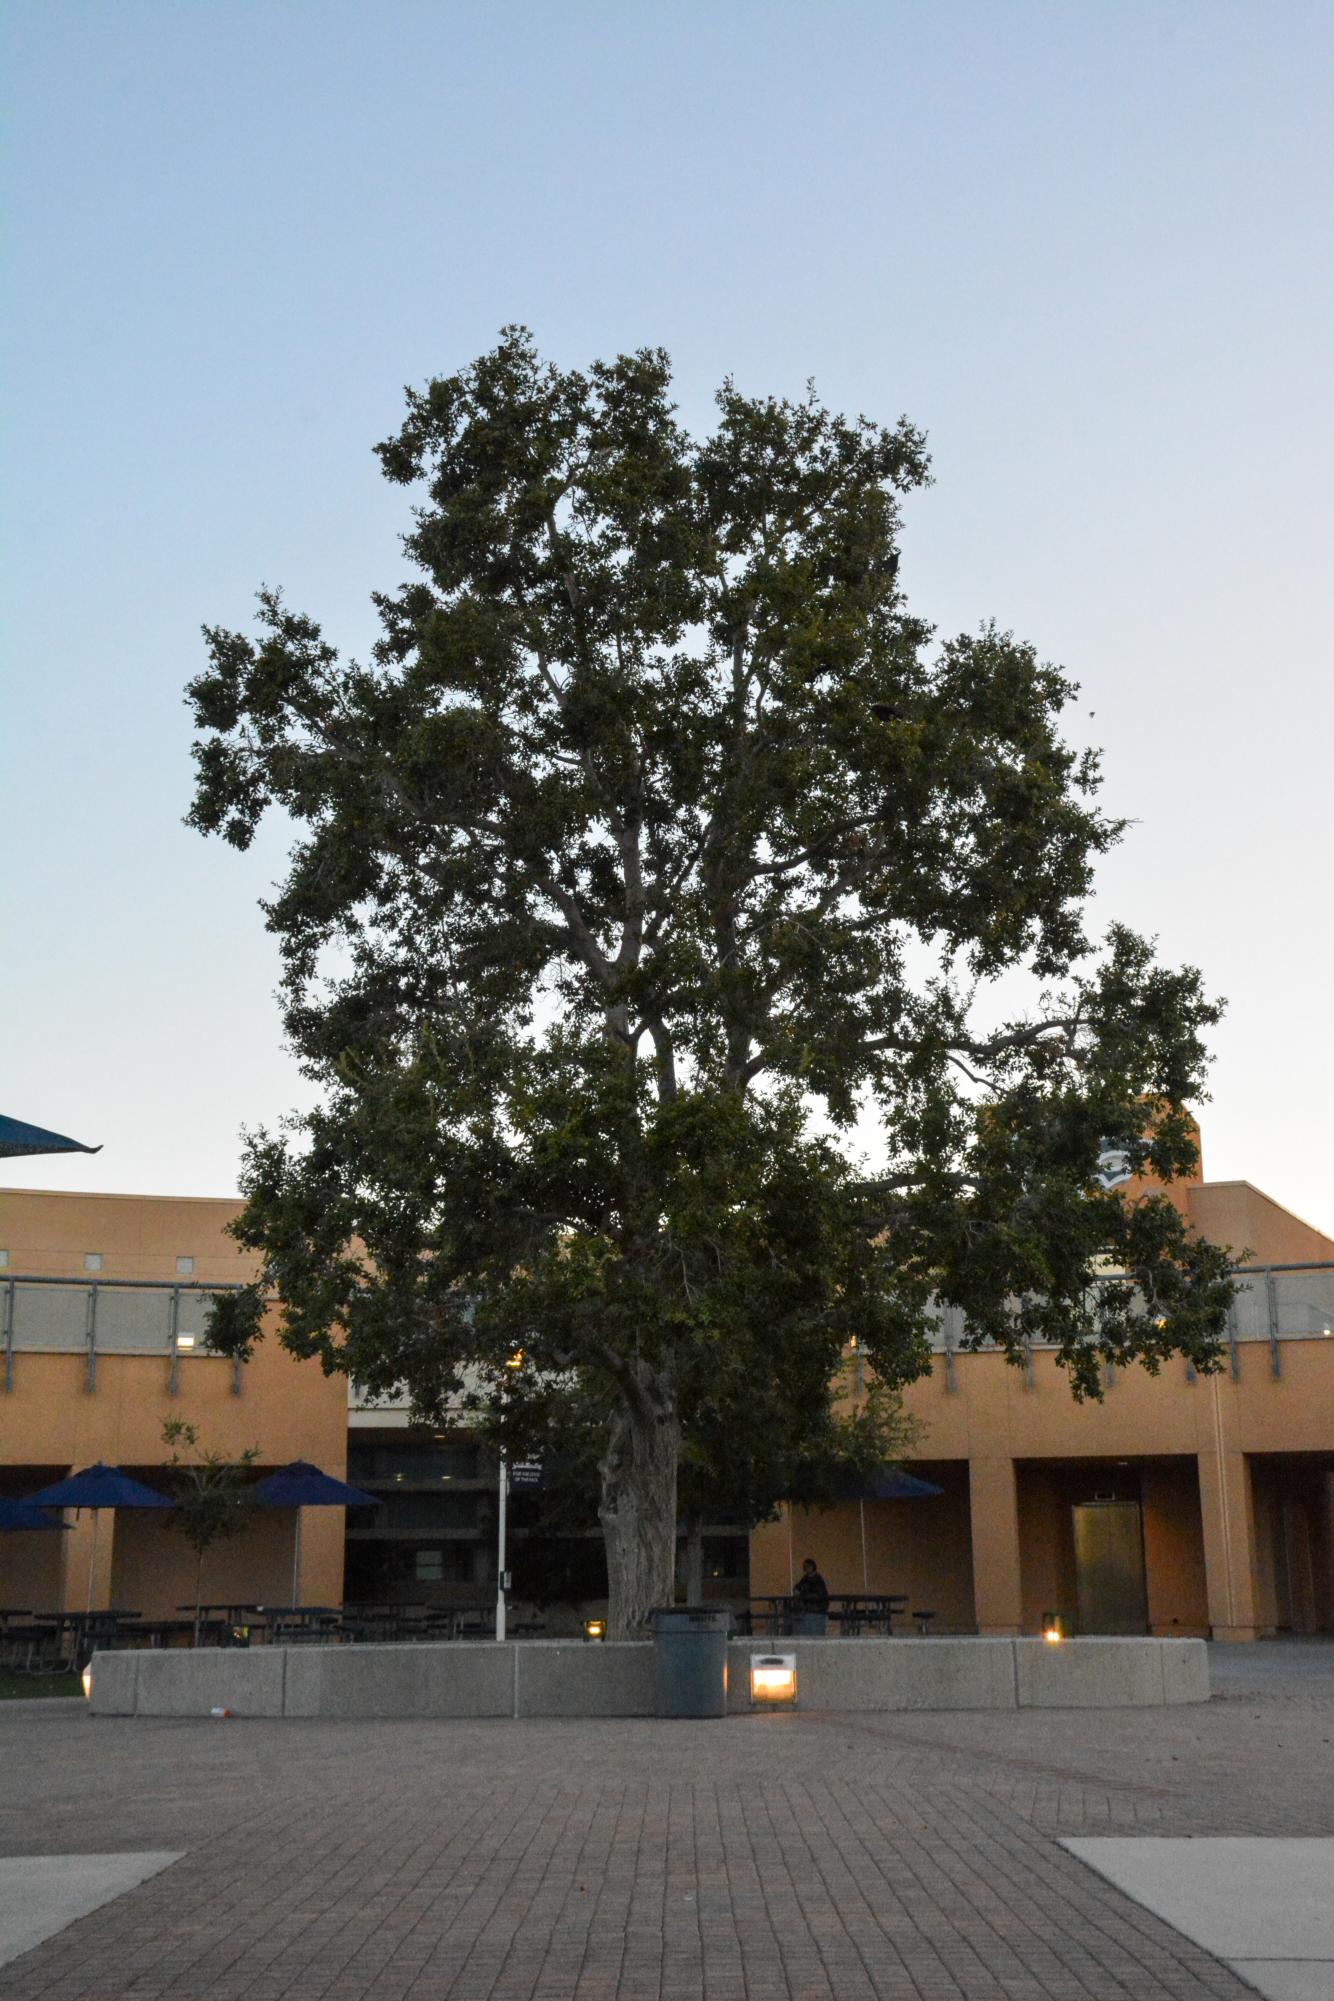 TALL AND MAJEST-OAK: Northwoods iconic oak tree stands tall at the center of the campus.
